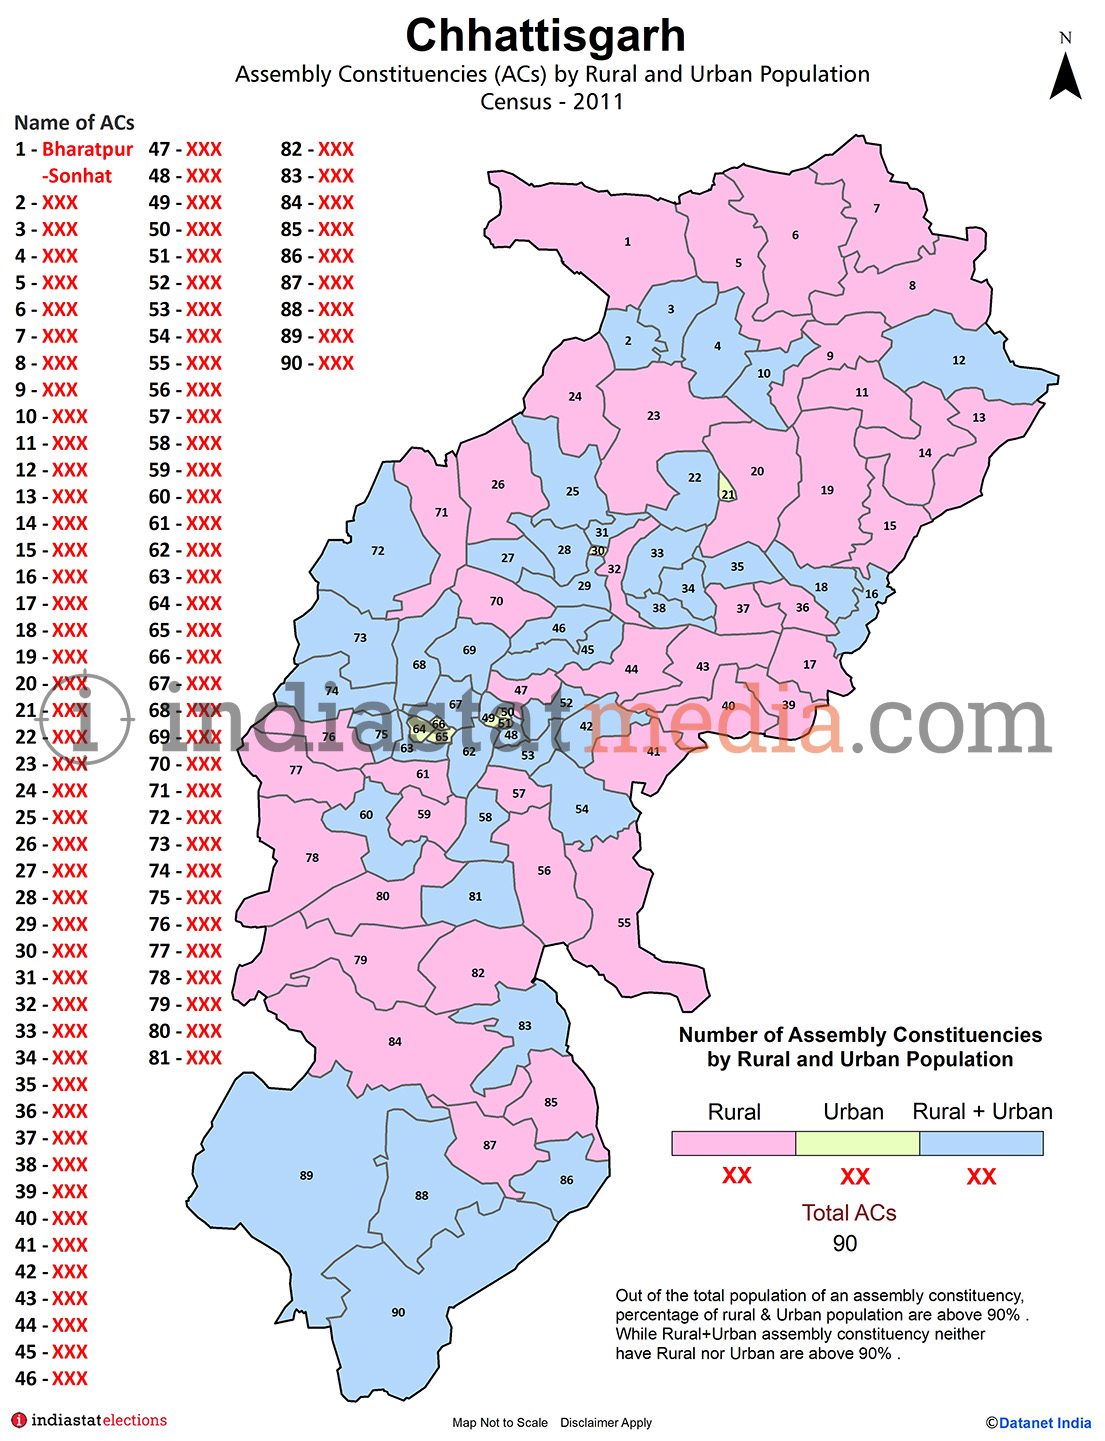 Assembly Constituencies (ACs) by Rural and Urban Population in Chhattisgarh - Census 2011